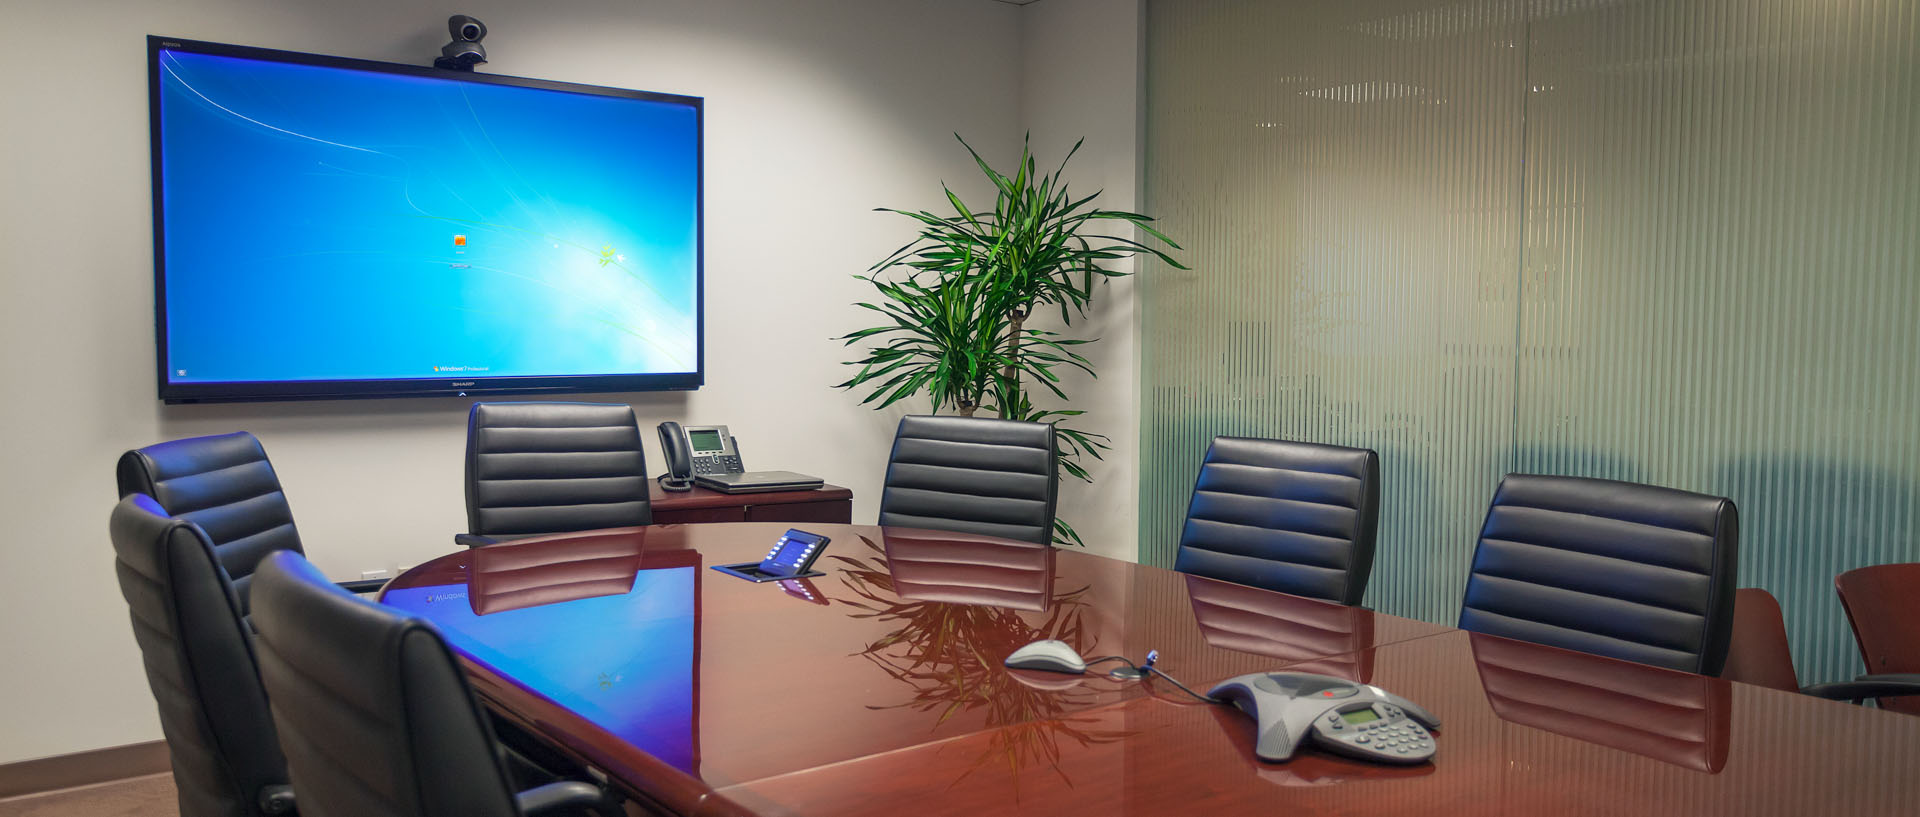 Learn more about Conference Rooms